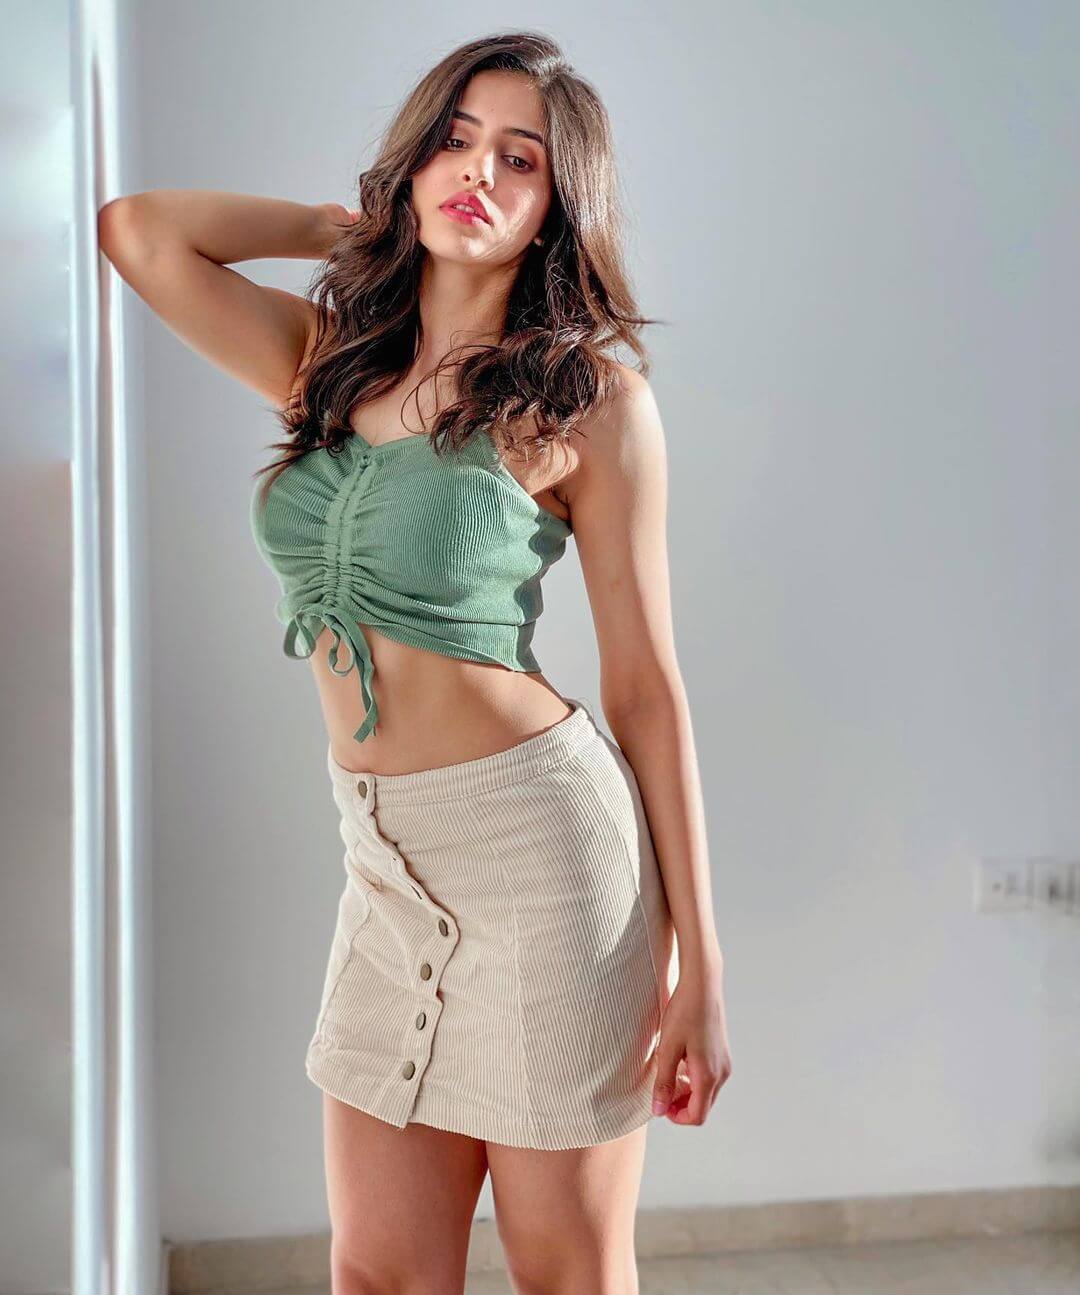 Sakshi Malikk  In Mini Denim Skirt with Green Crop Top Can Be Your Causal Outfit Too Sakshi Malik Hot and Sexy Outfit Look